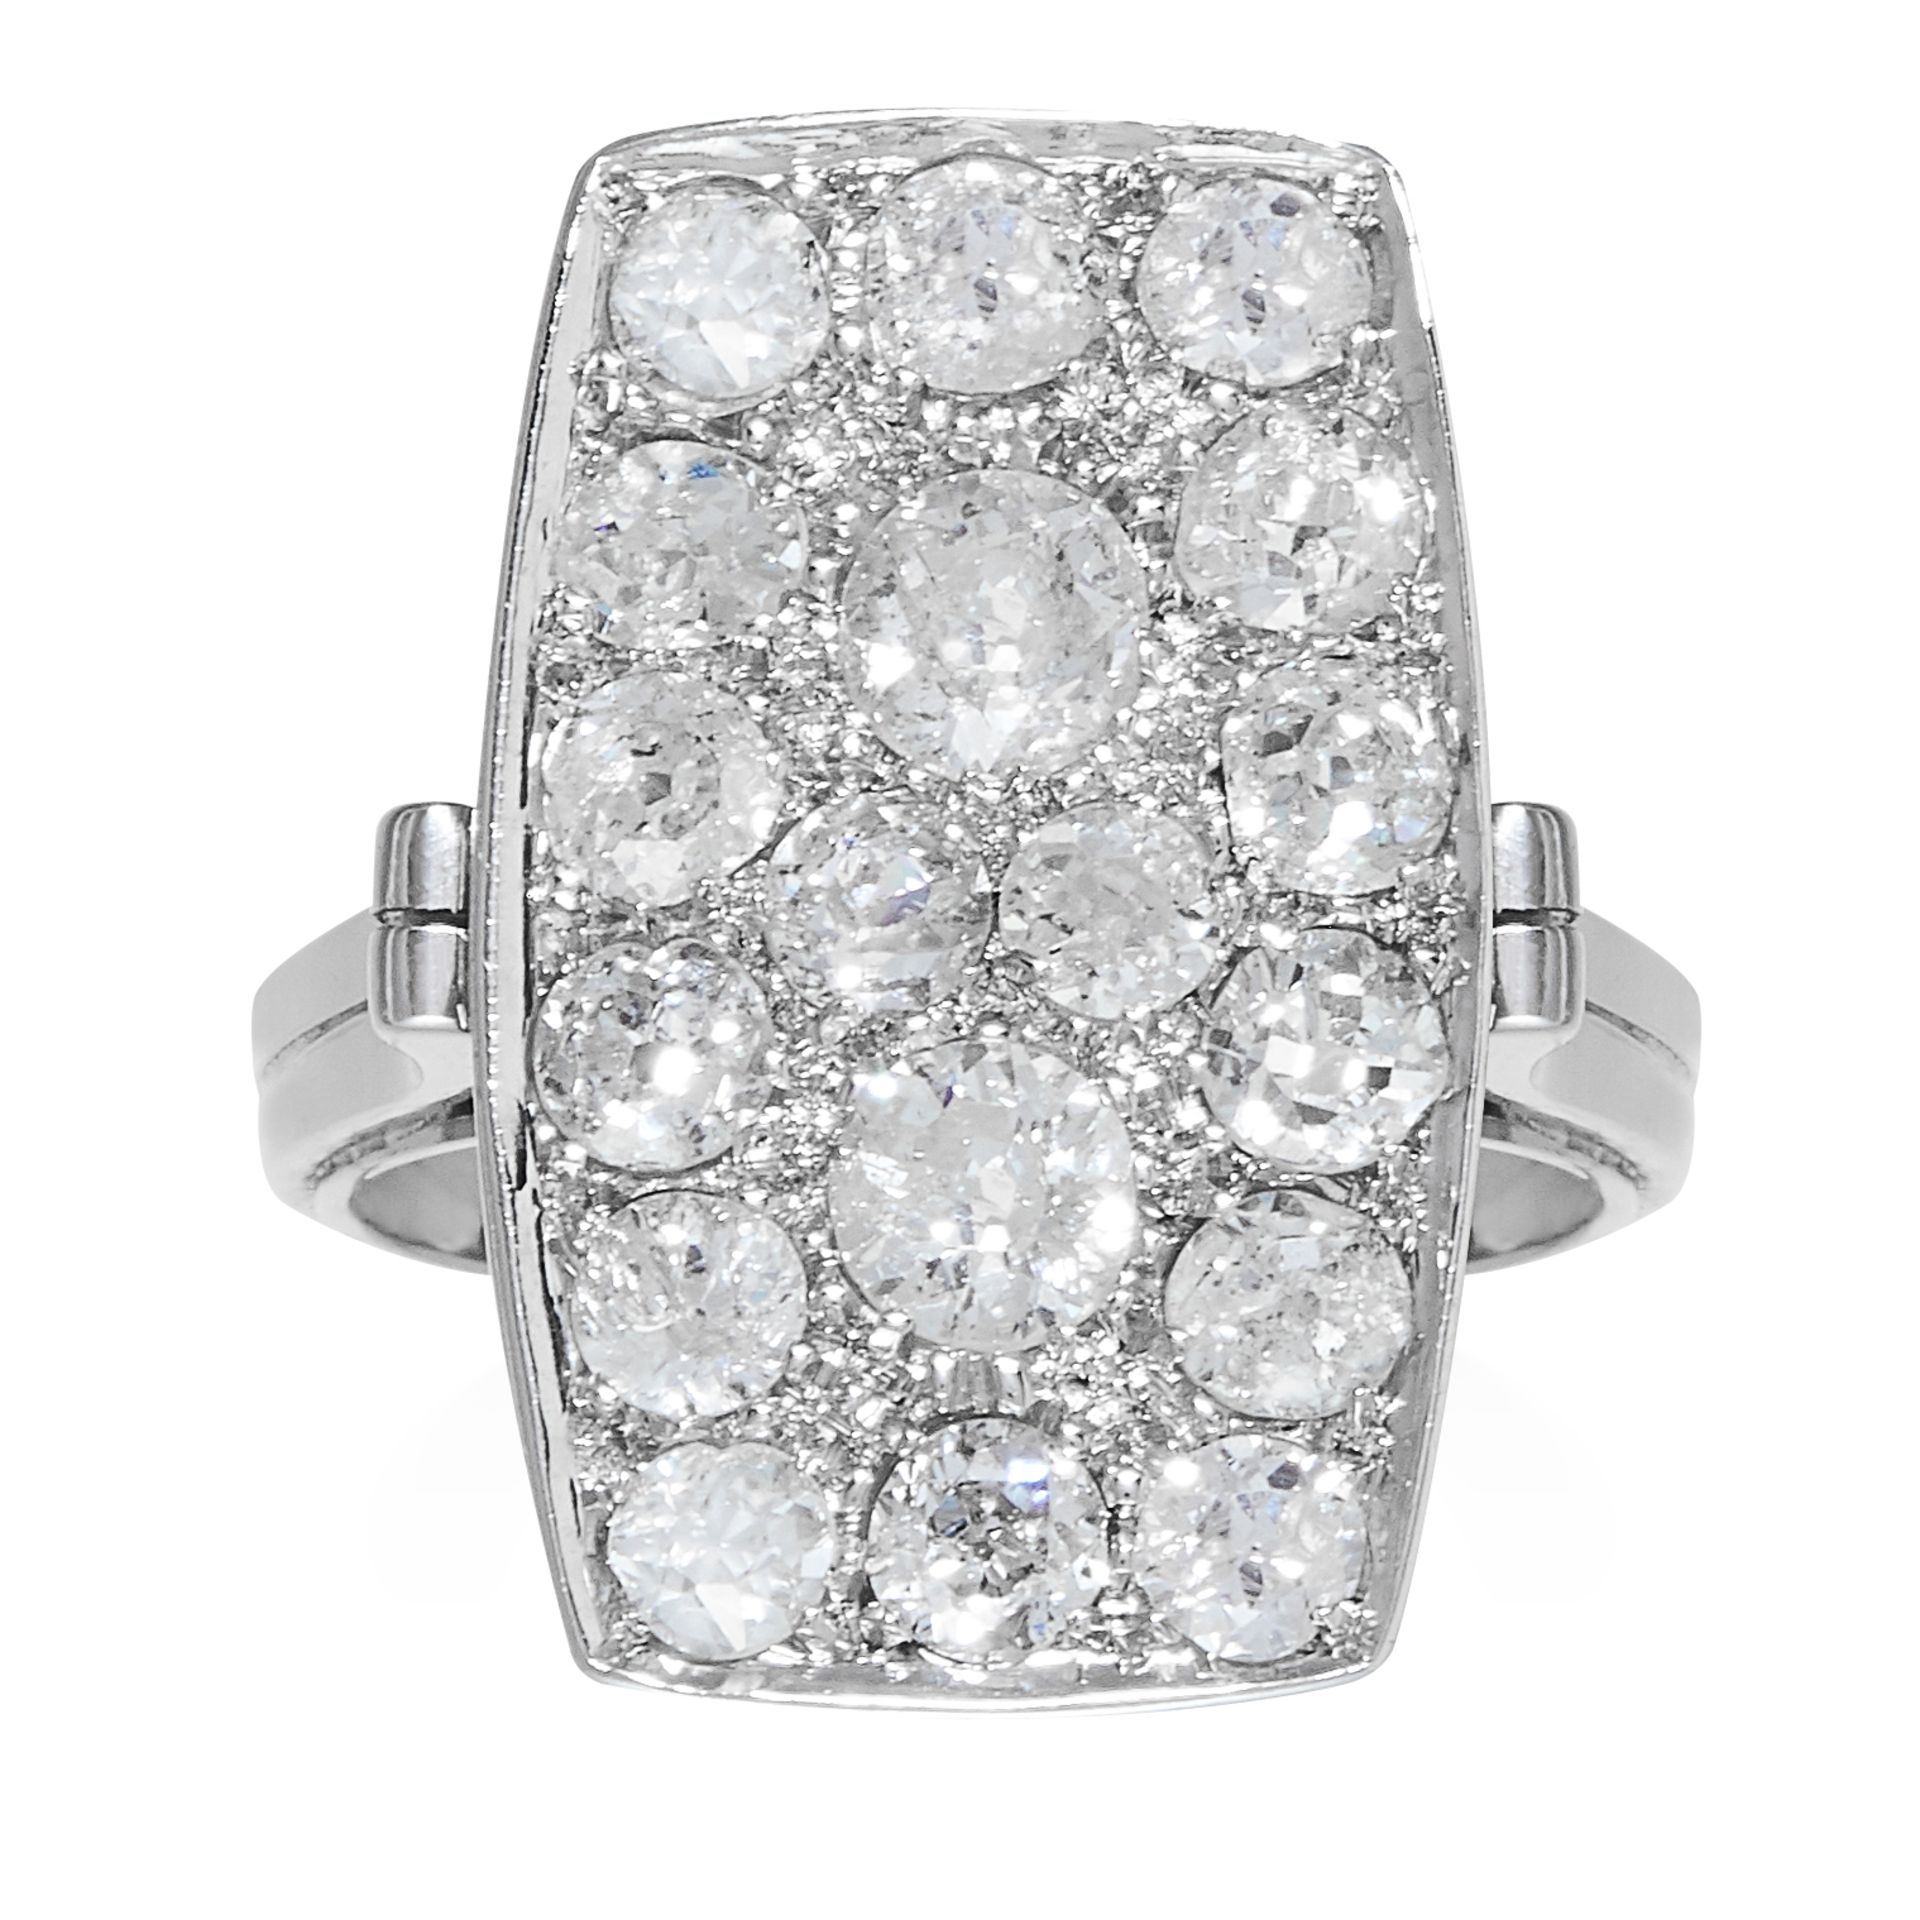 AN ART DECO DIAMOND RING in platinum or white gold, the rectangular face jewelled with old round cut